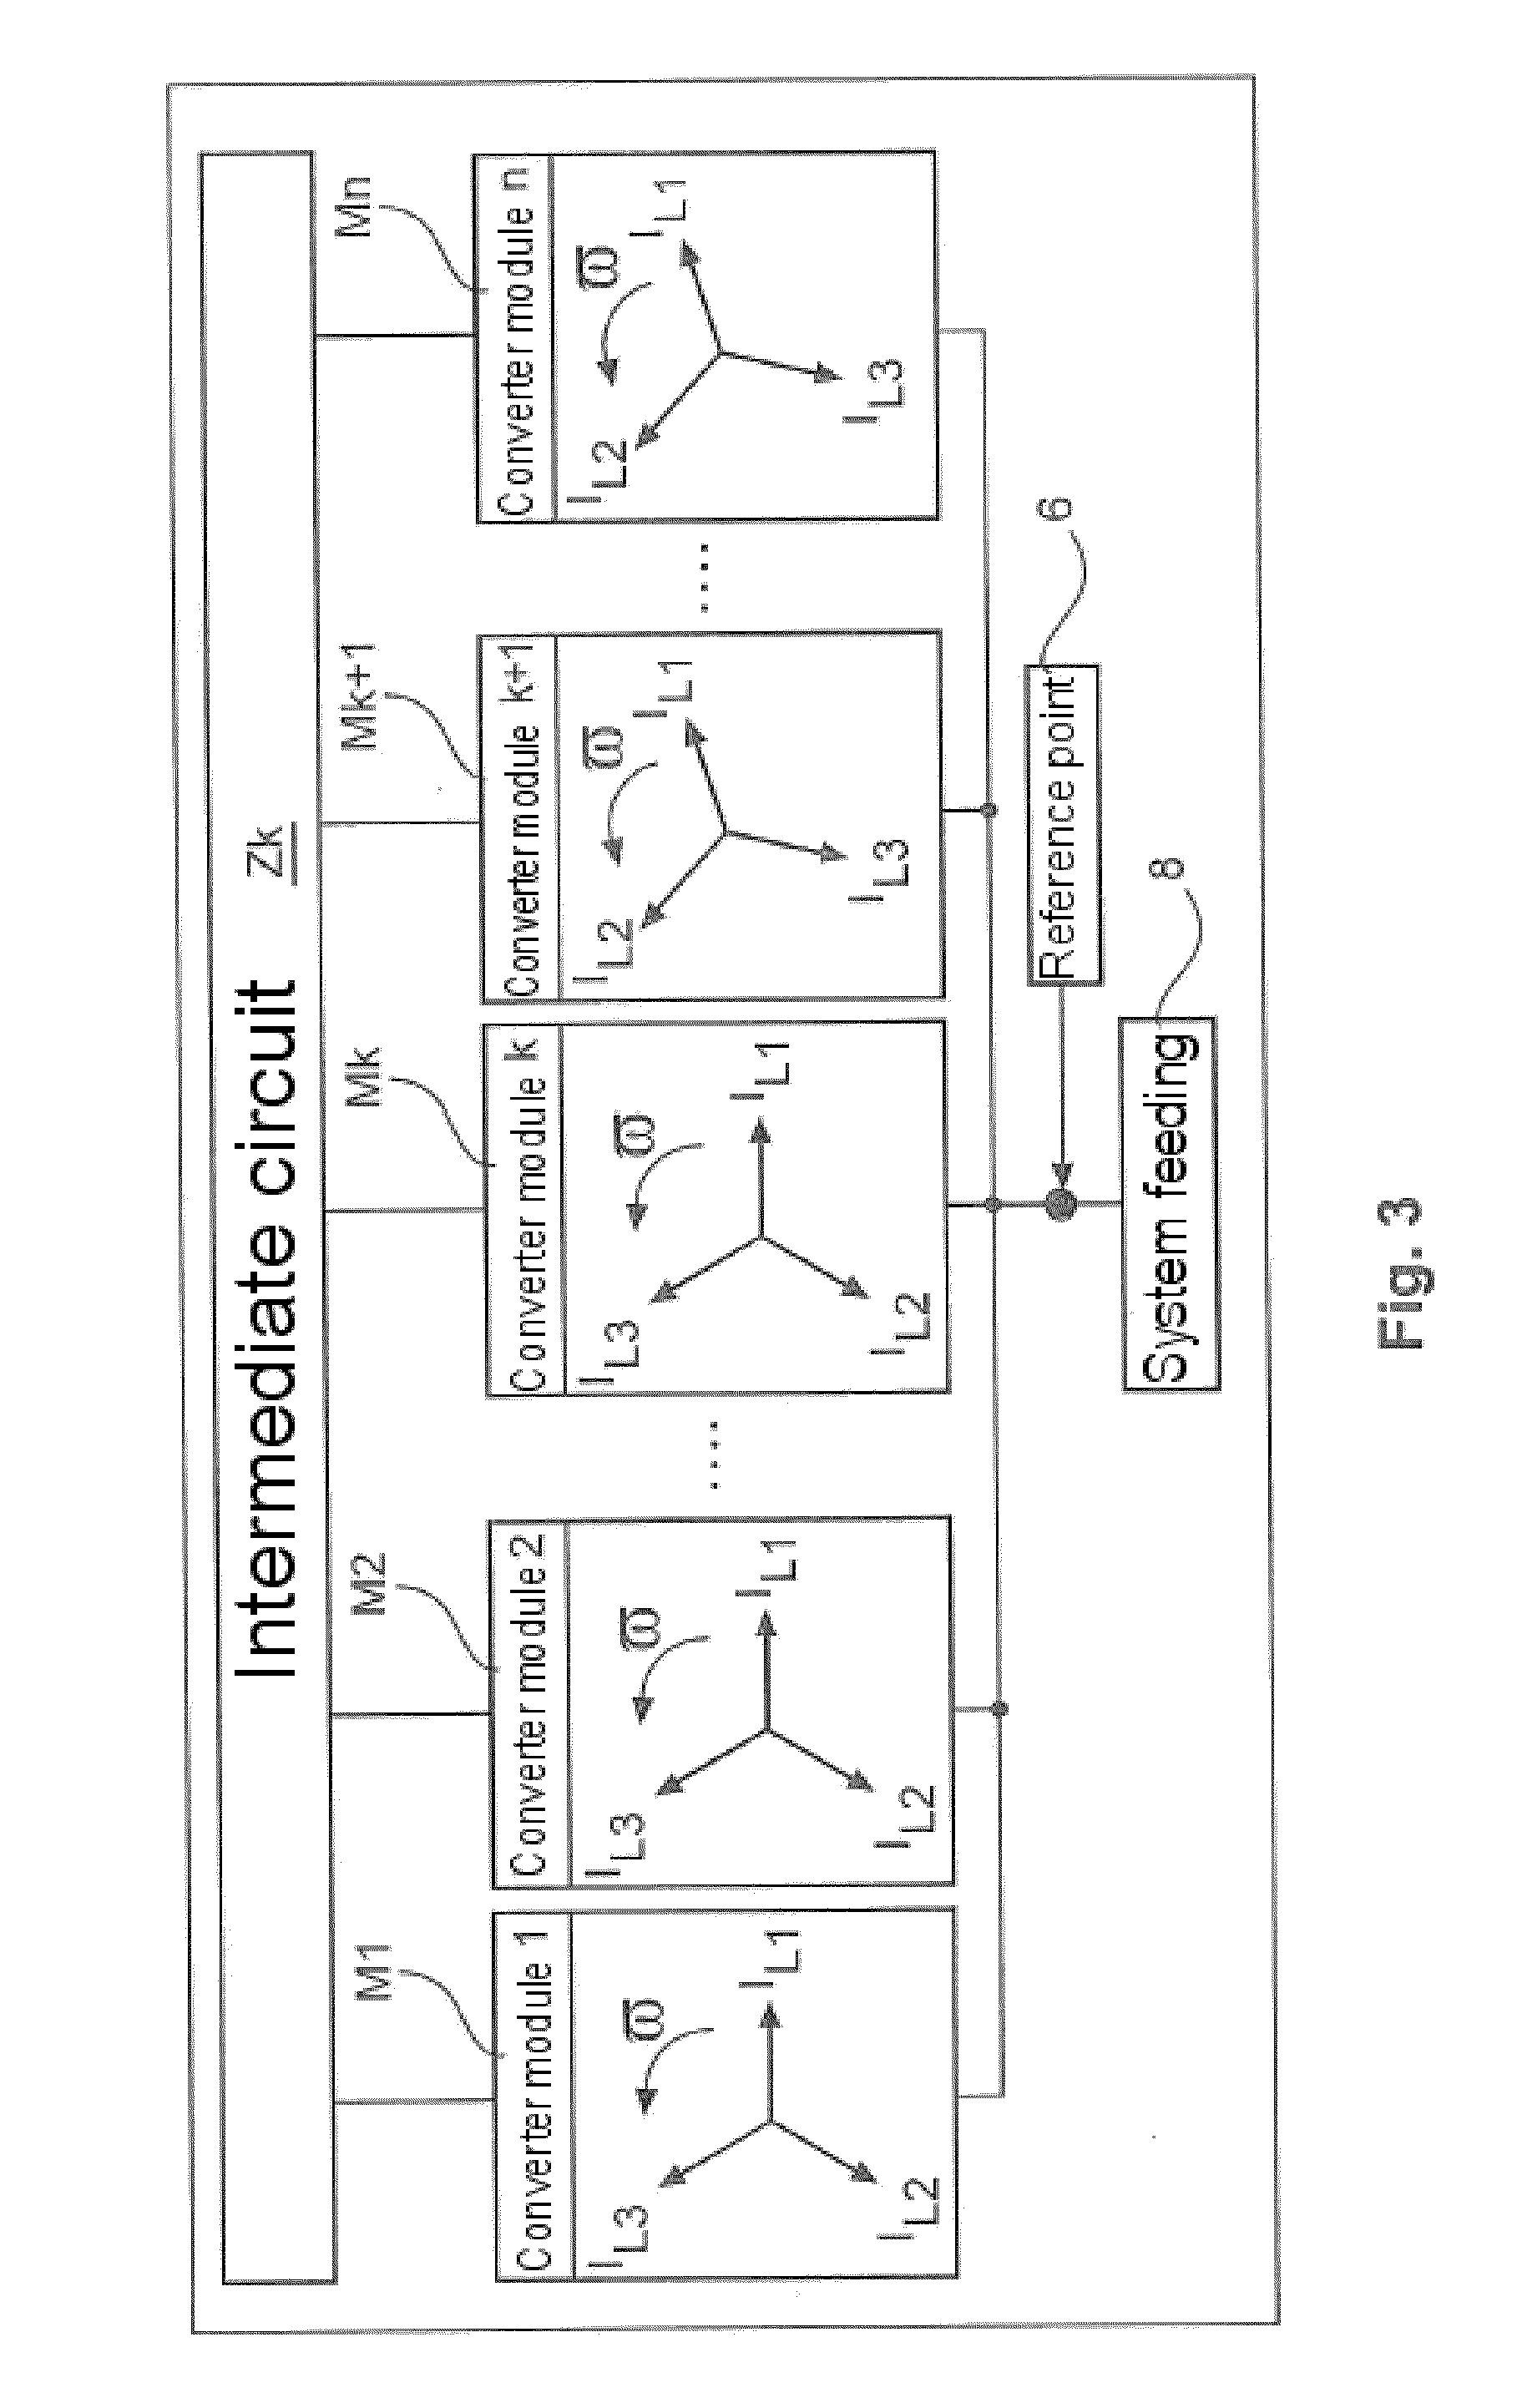 Method for feeding electrical power into a three-phase ac voltage system